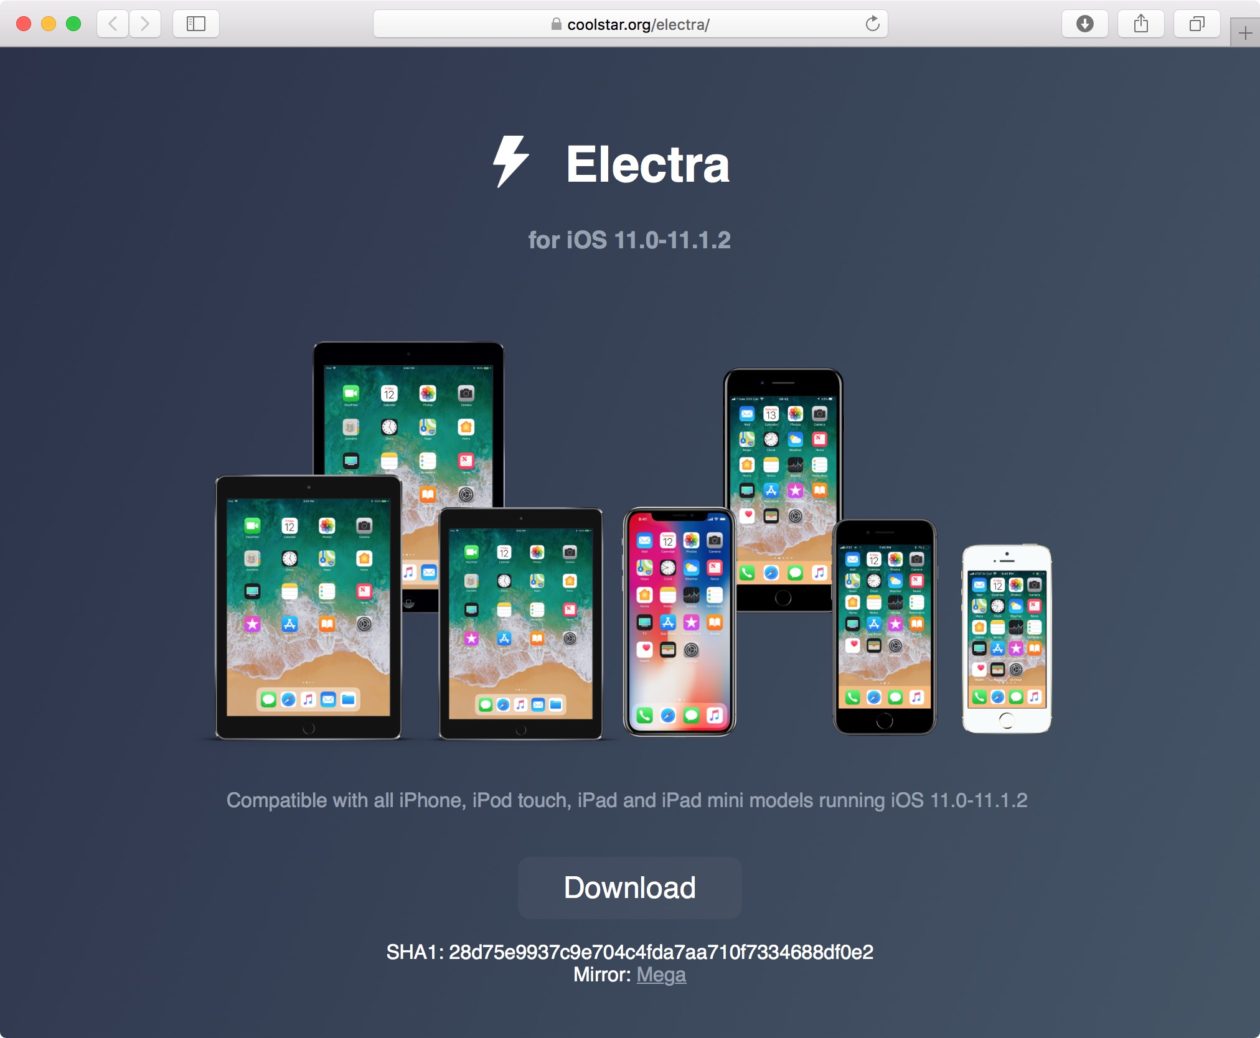 Jailbreak Electra brings Cydia back to devices running (almost) all versions of iOS 11 [atualizado]